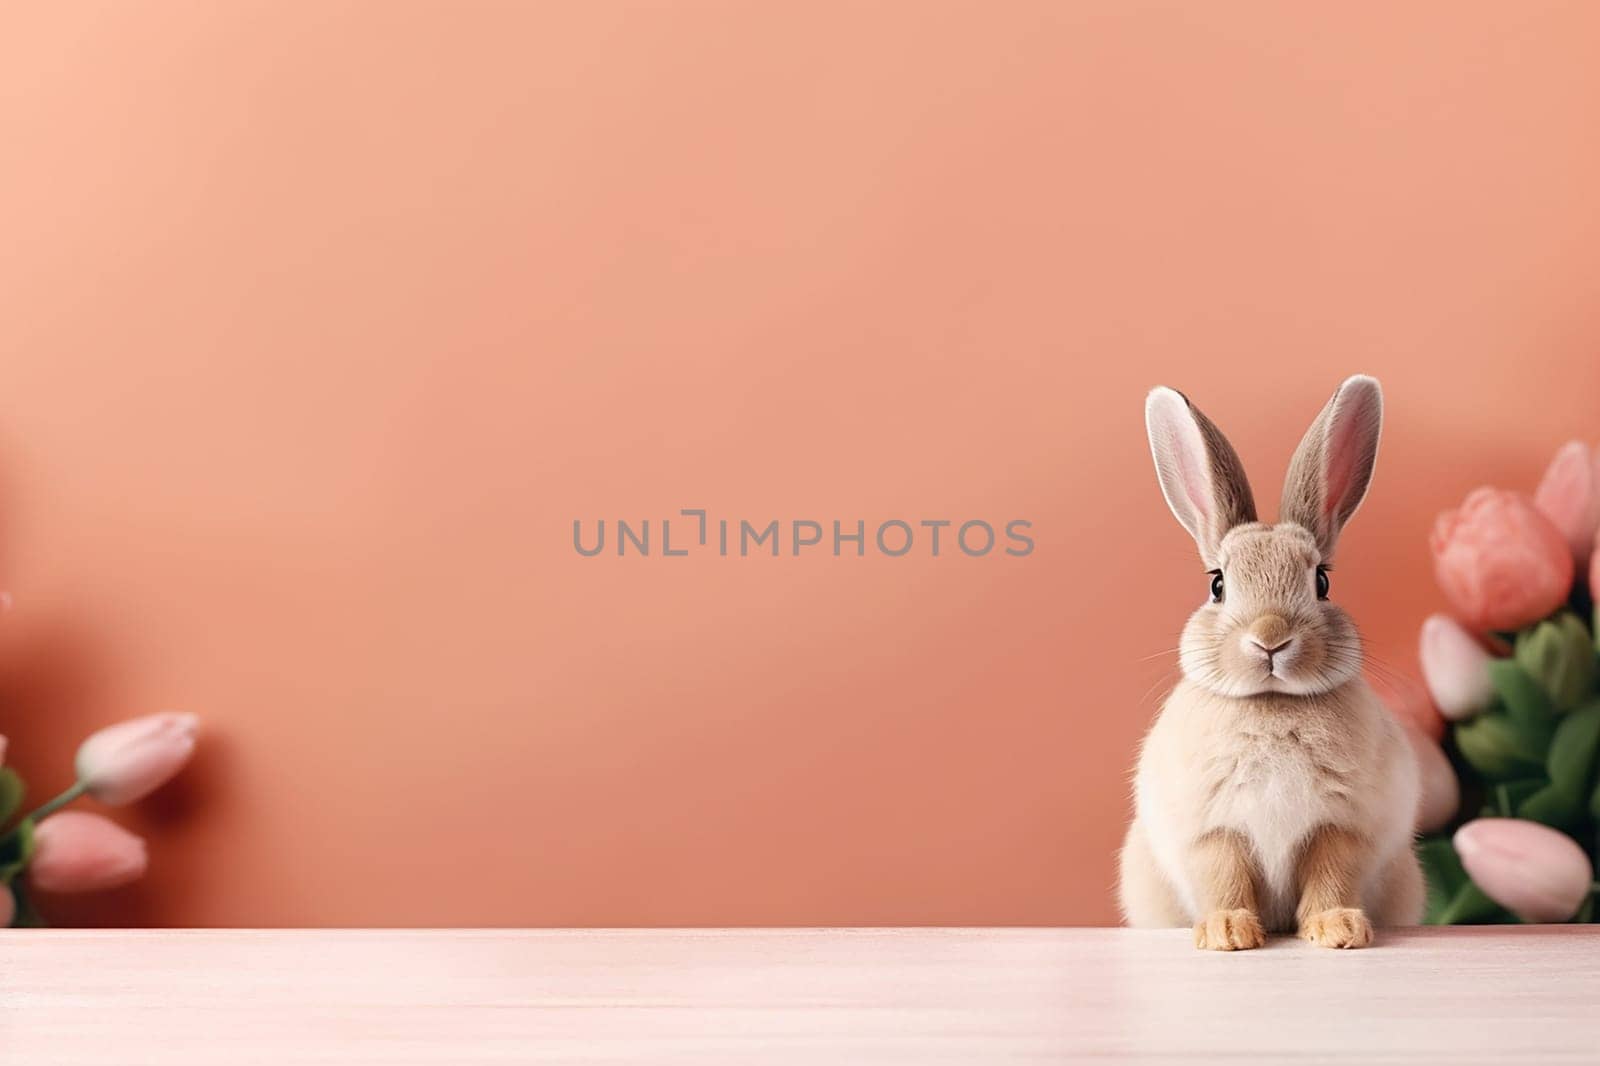 A little cute and adorable small rabbit, baby bunny photo, neutral background, domestic animal, family pet,